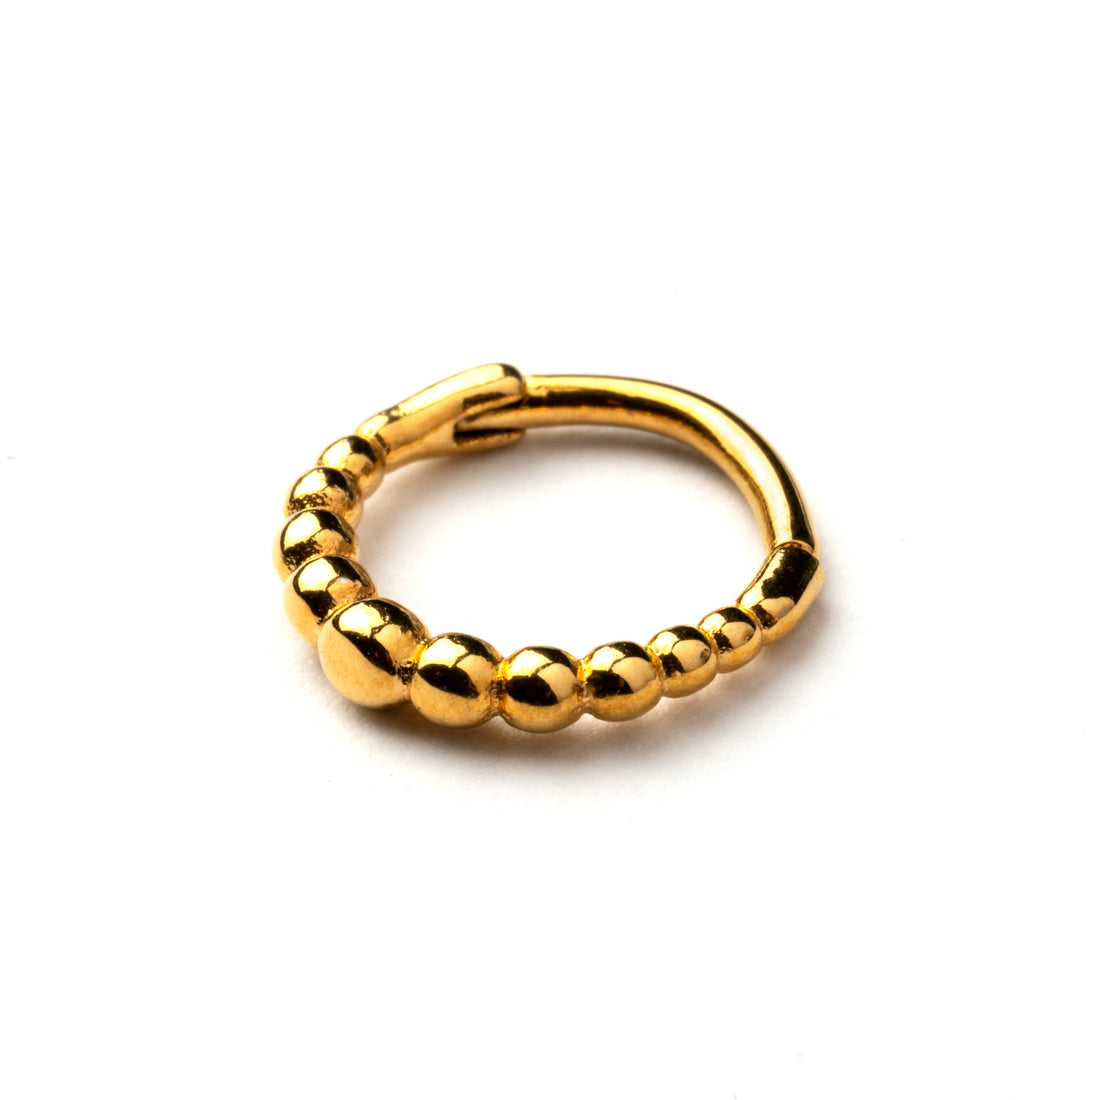 Golden surgical steel clicker piercing ring formed by tiny spheres down view